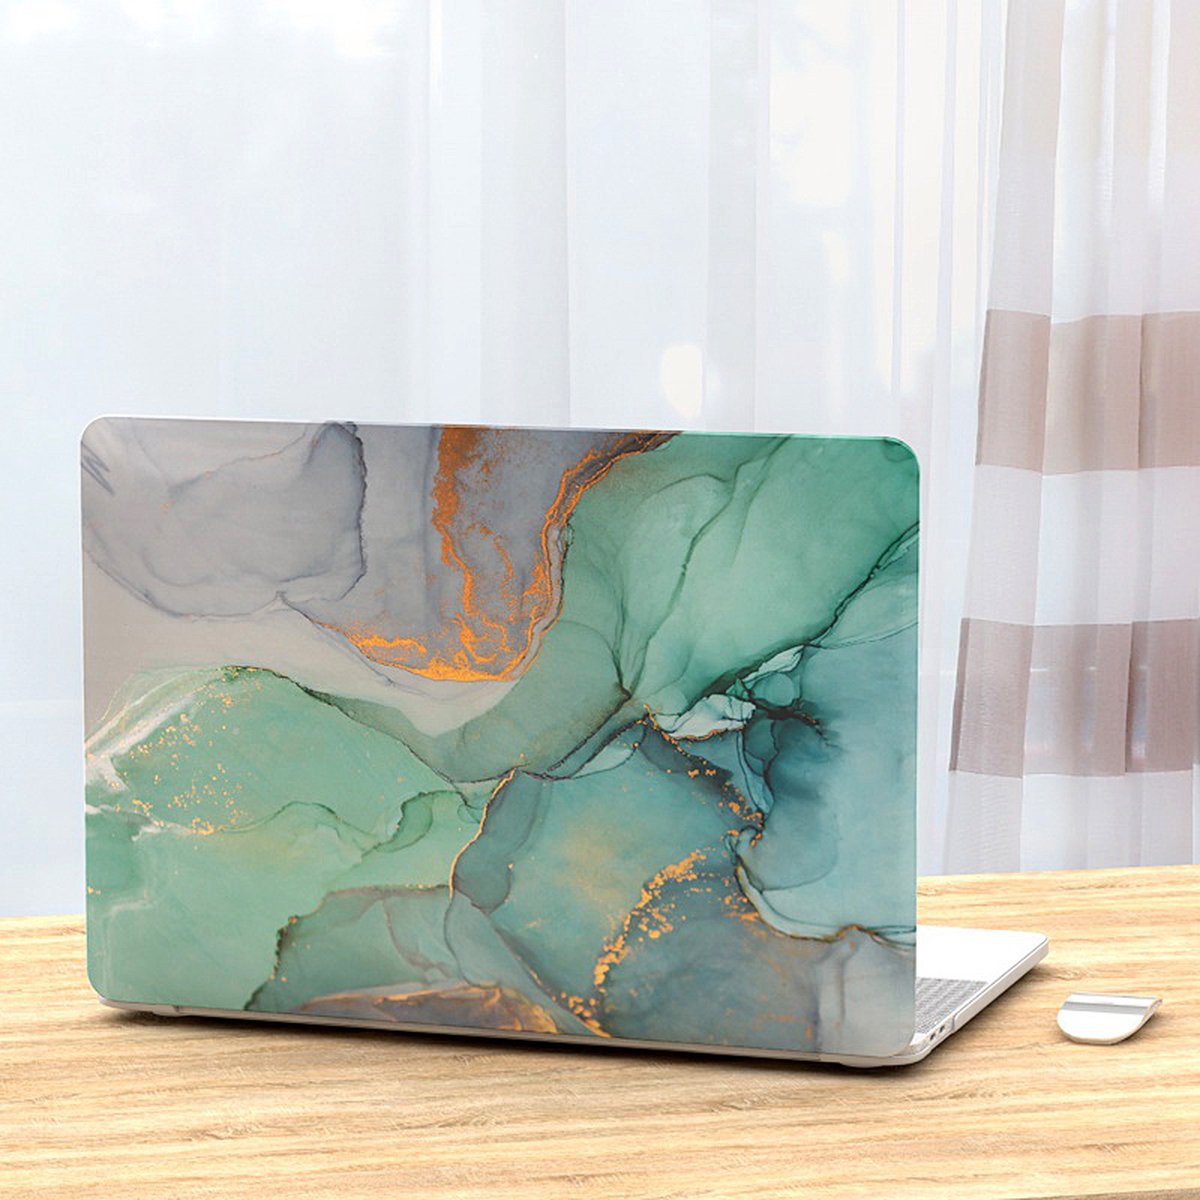 Hulsels - Hard case Cover Apple Macbook Air 13.3 Inch 2018/2019/2020 (A1932/A2179/A2337) Hard Shell Laptophoes - Sleeve Protector Hardshell Hoes - Hardcase Beschermhoes - Marmer - Groen - Goud